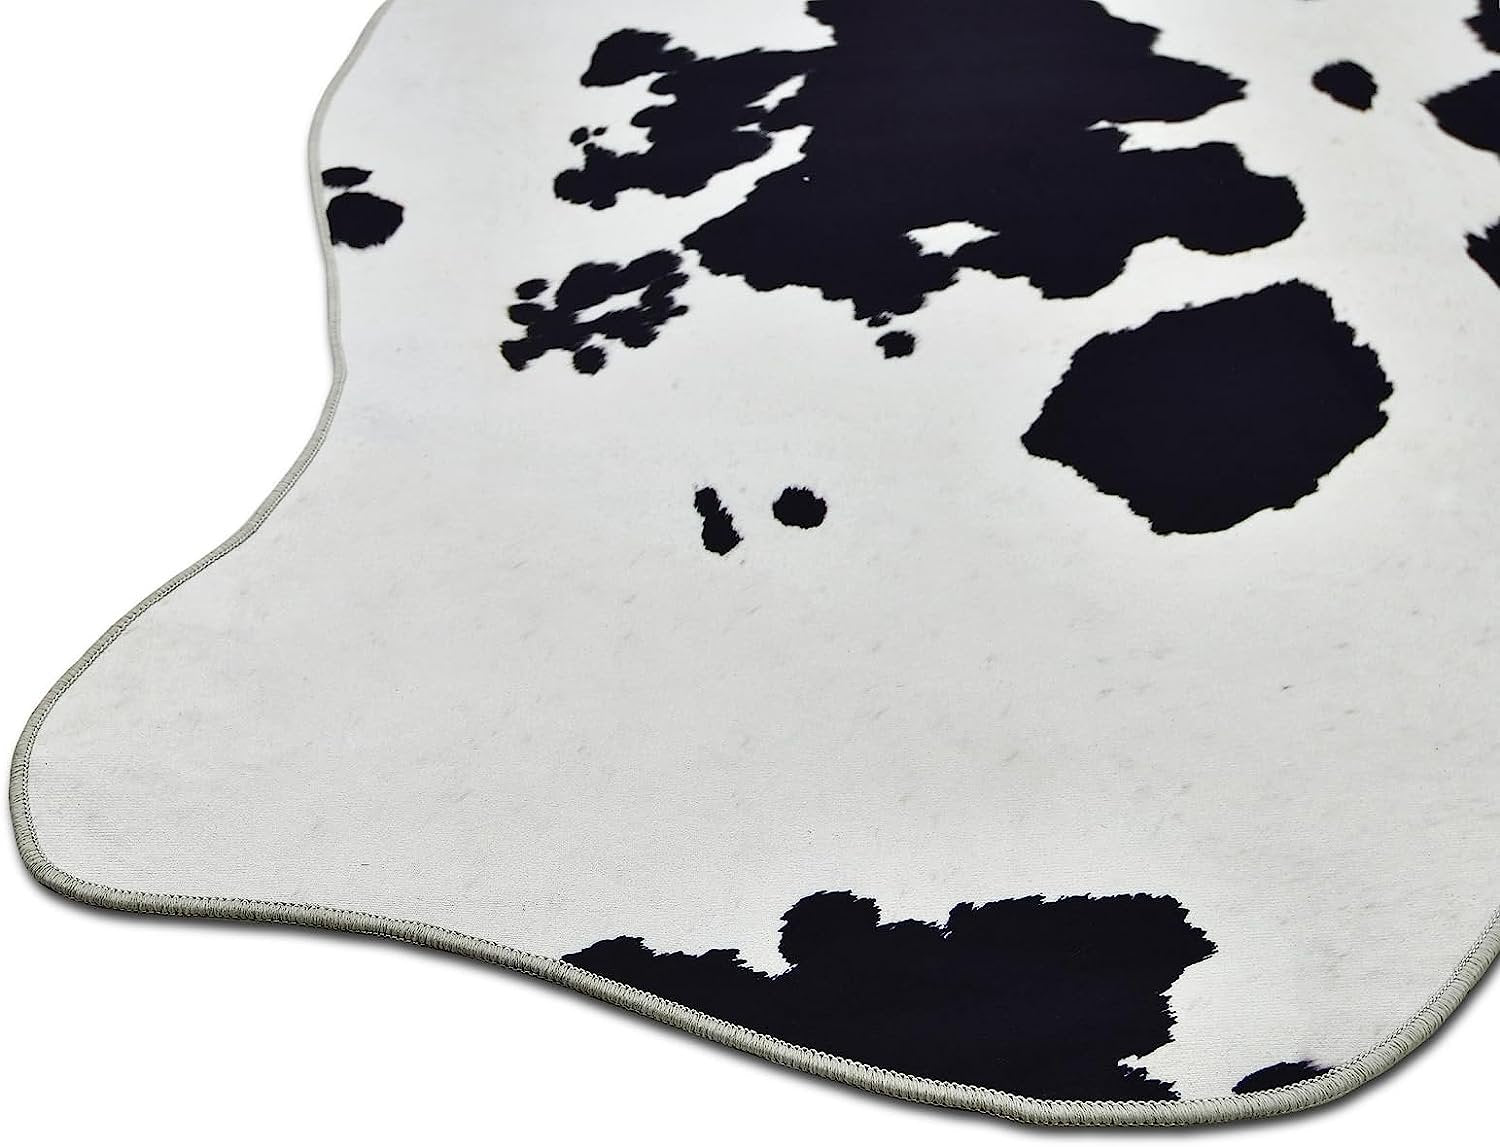 HR Premium Non-Slip Faux Cowhide Black and White Area Rug for Cabin and Lodge #1120